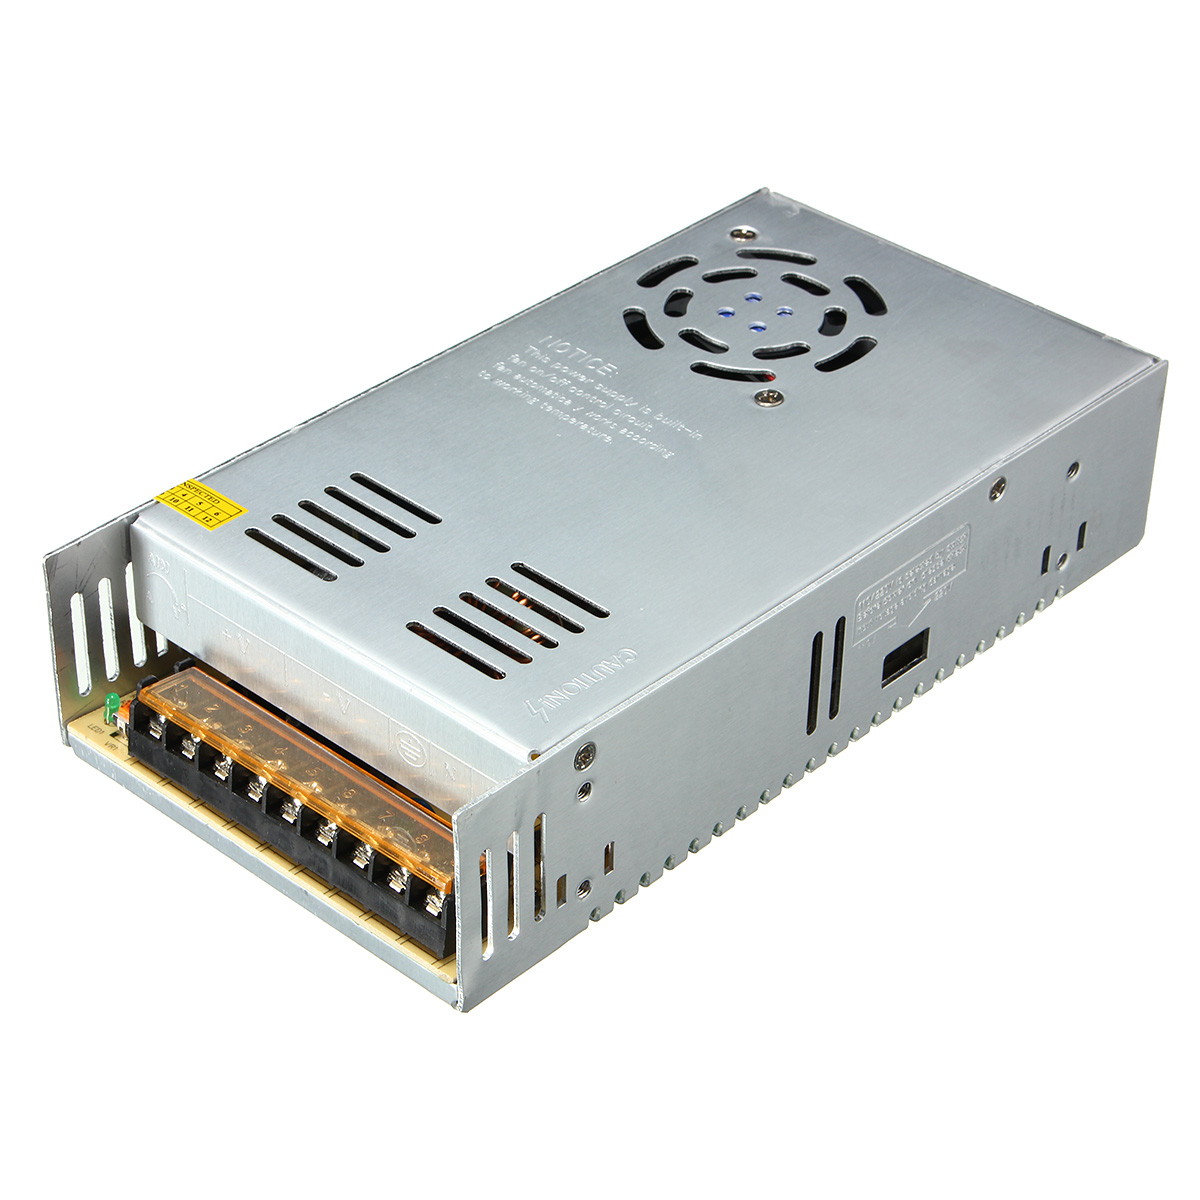 

AC 110-220V to DC 27V 15A 400W Switching Power Supply SMPS Transformer for LED Strip Light